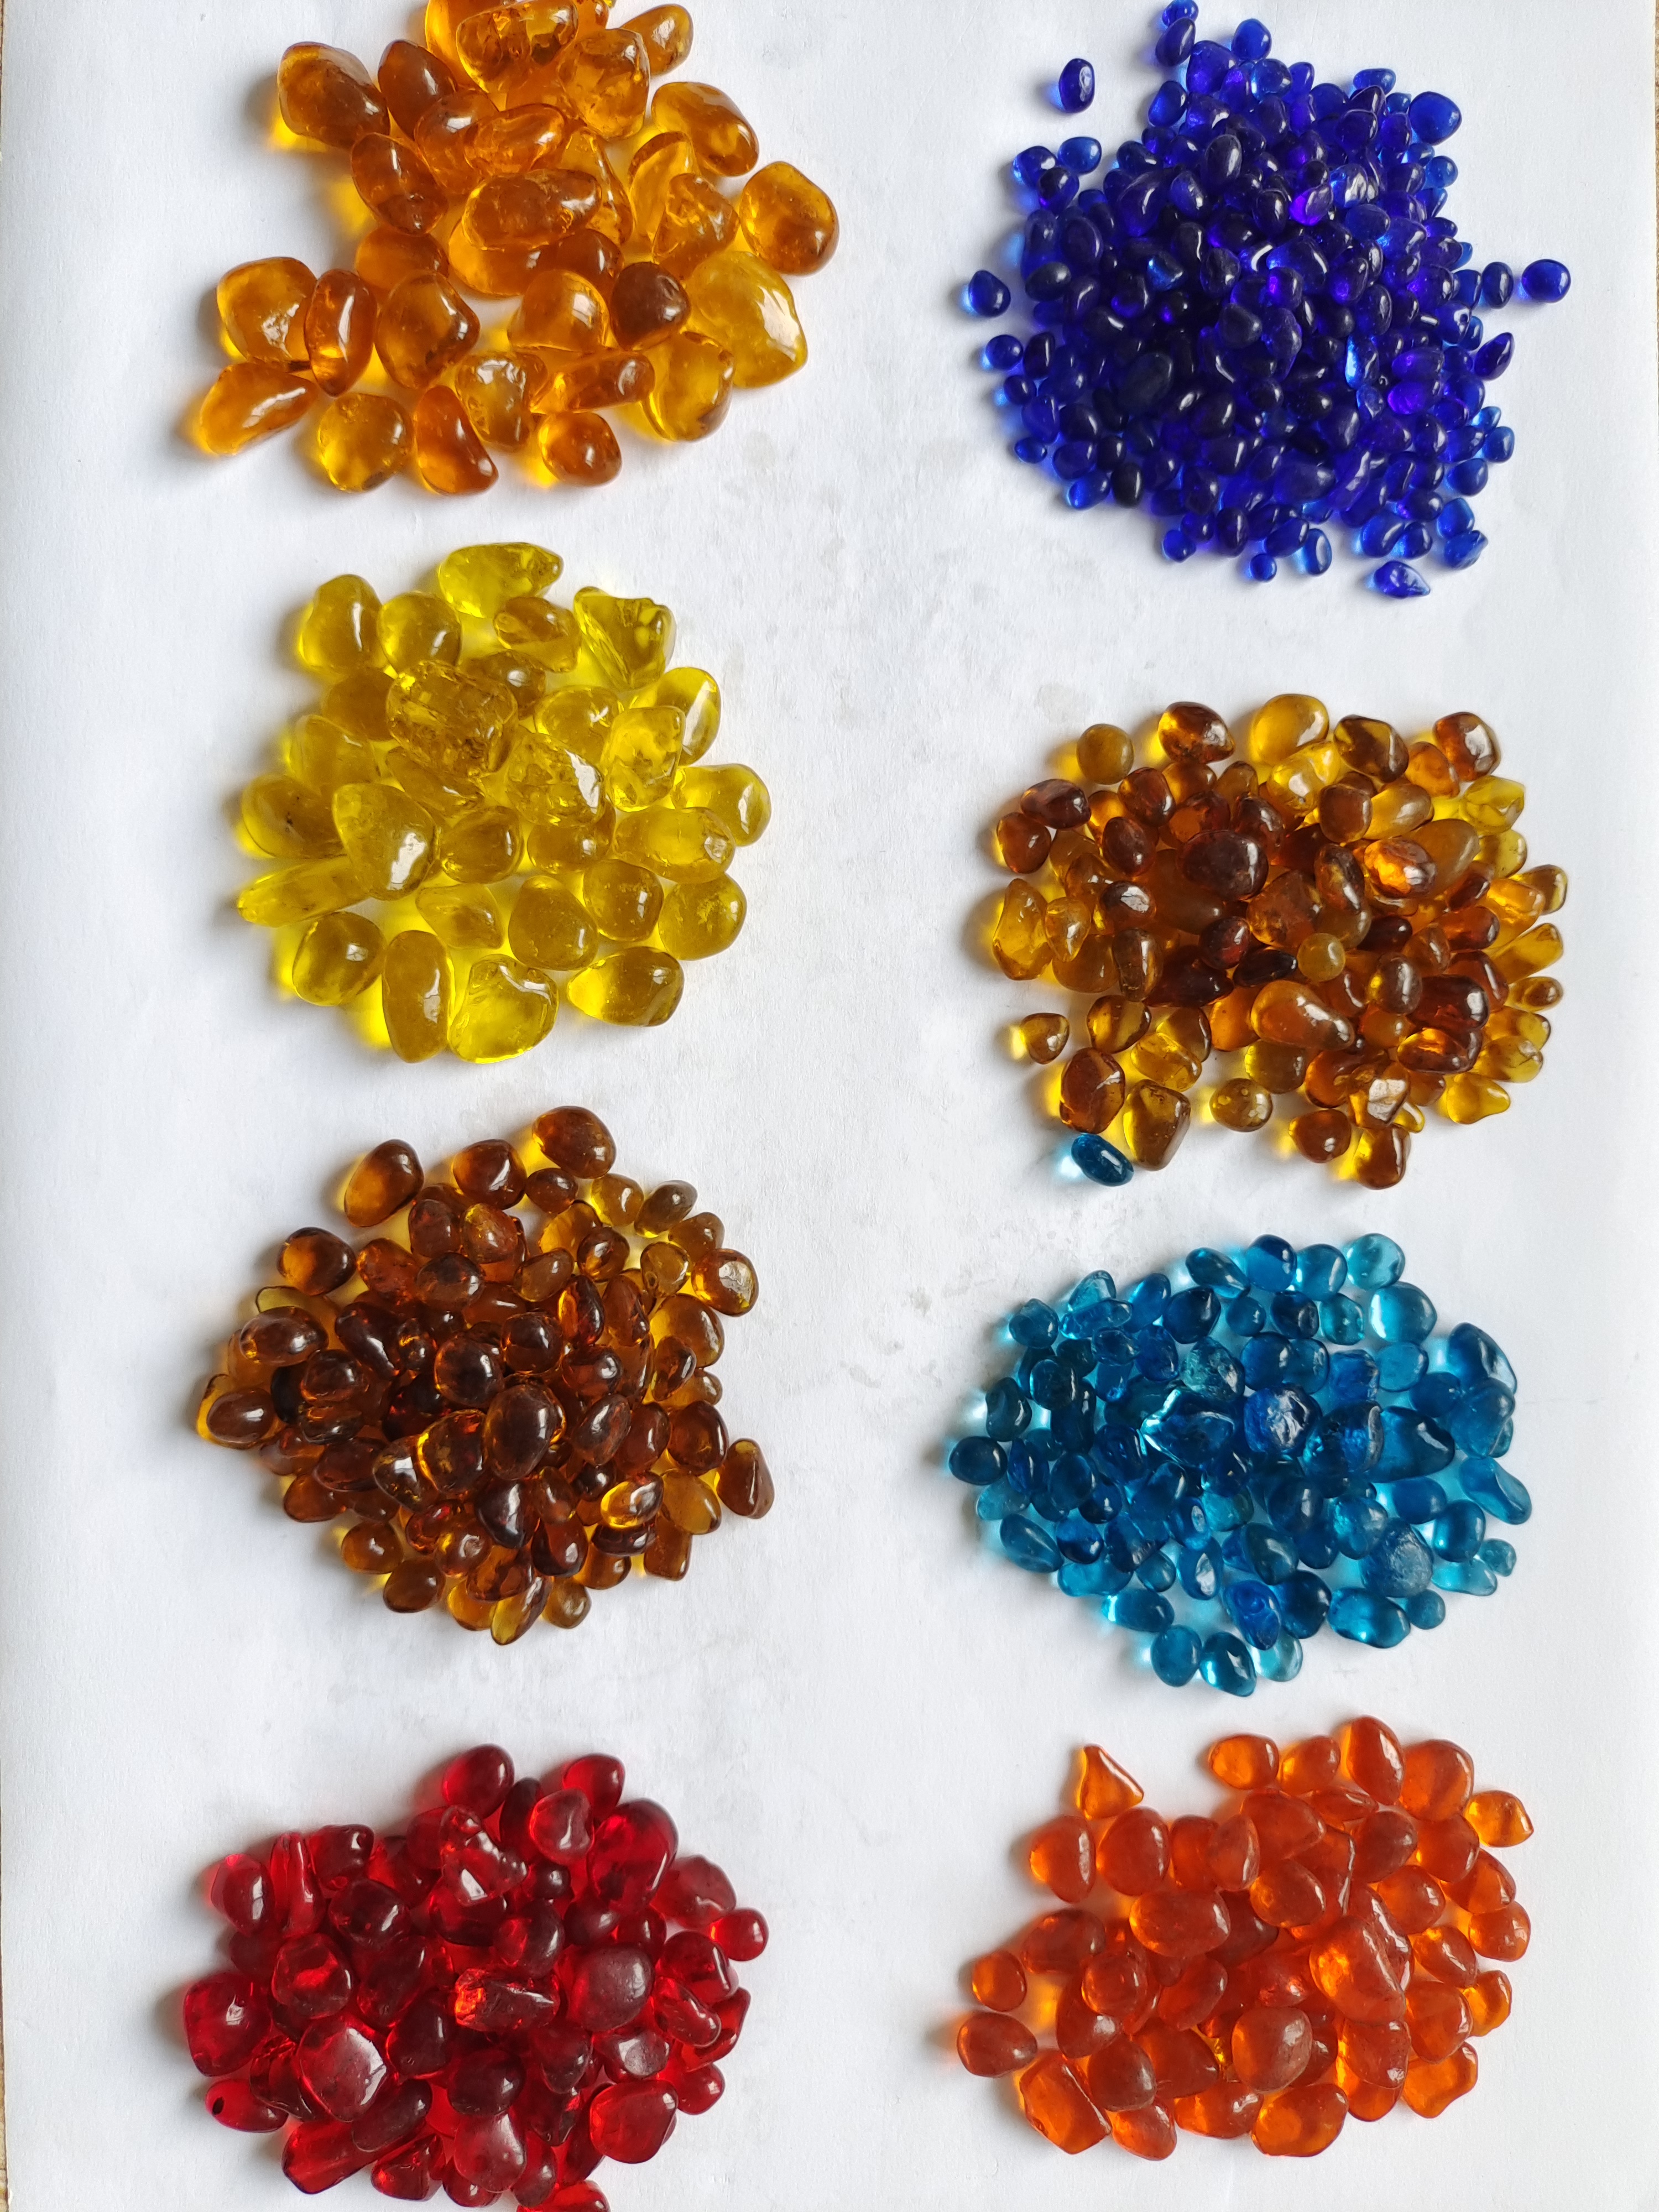 Supplier of glass sand and glass beads for landscaping